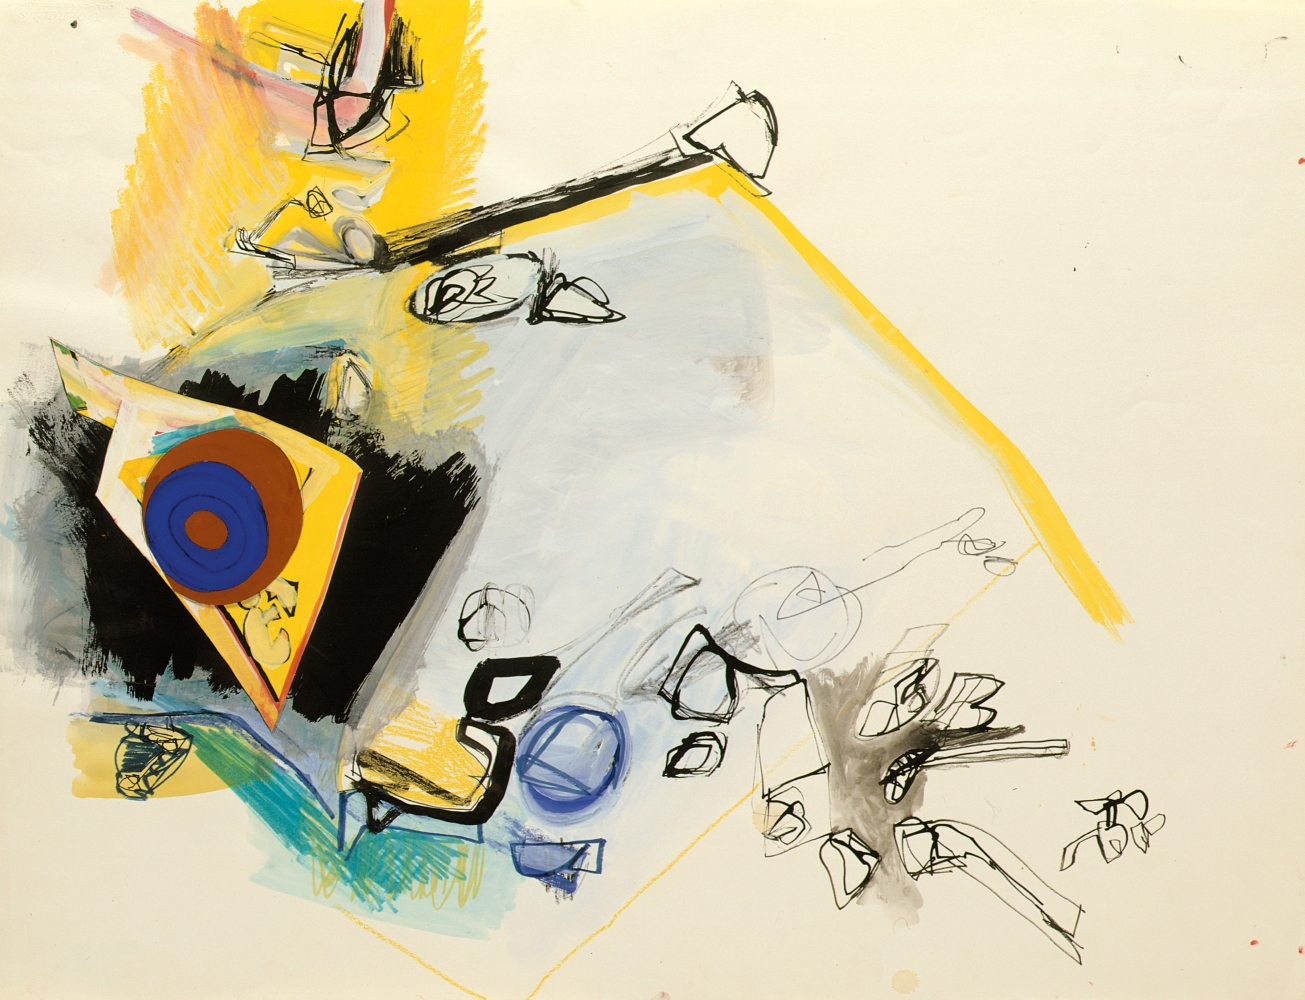 [FIG. 5]

Eva Hesse

No Title, c. 1963
Gouache, ink, felt-tip pen, crayon, pencil, and cut-and-pasted painted paper on paper
19 5/8 &amp;times; 25 1/2 inches (49.8 &amp;times; 64.8 cm)
The Museum of Modern Art, New York; The Judith Rothschild Foundation Contemporary Drawings Collection Gift.
Image&amp;nbsp;courtesy The Estate of Eva Hesse.
Courtesy Hauser &amp;amp; Wirth.